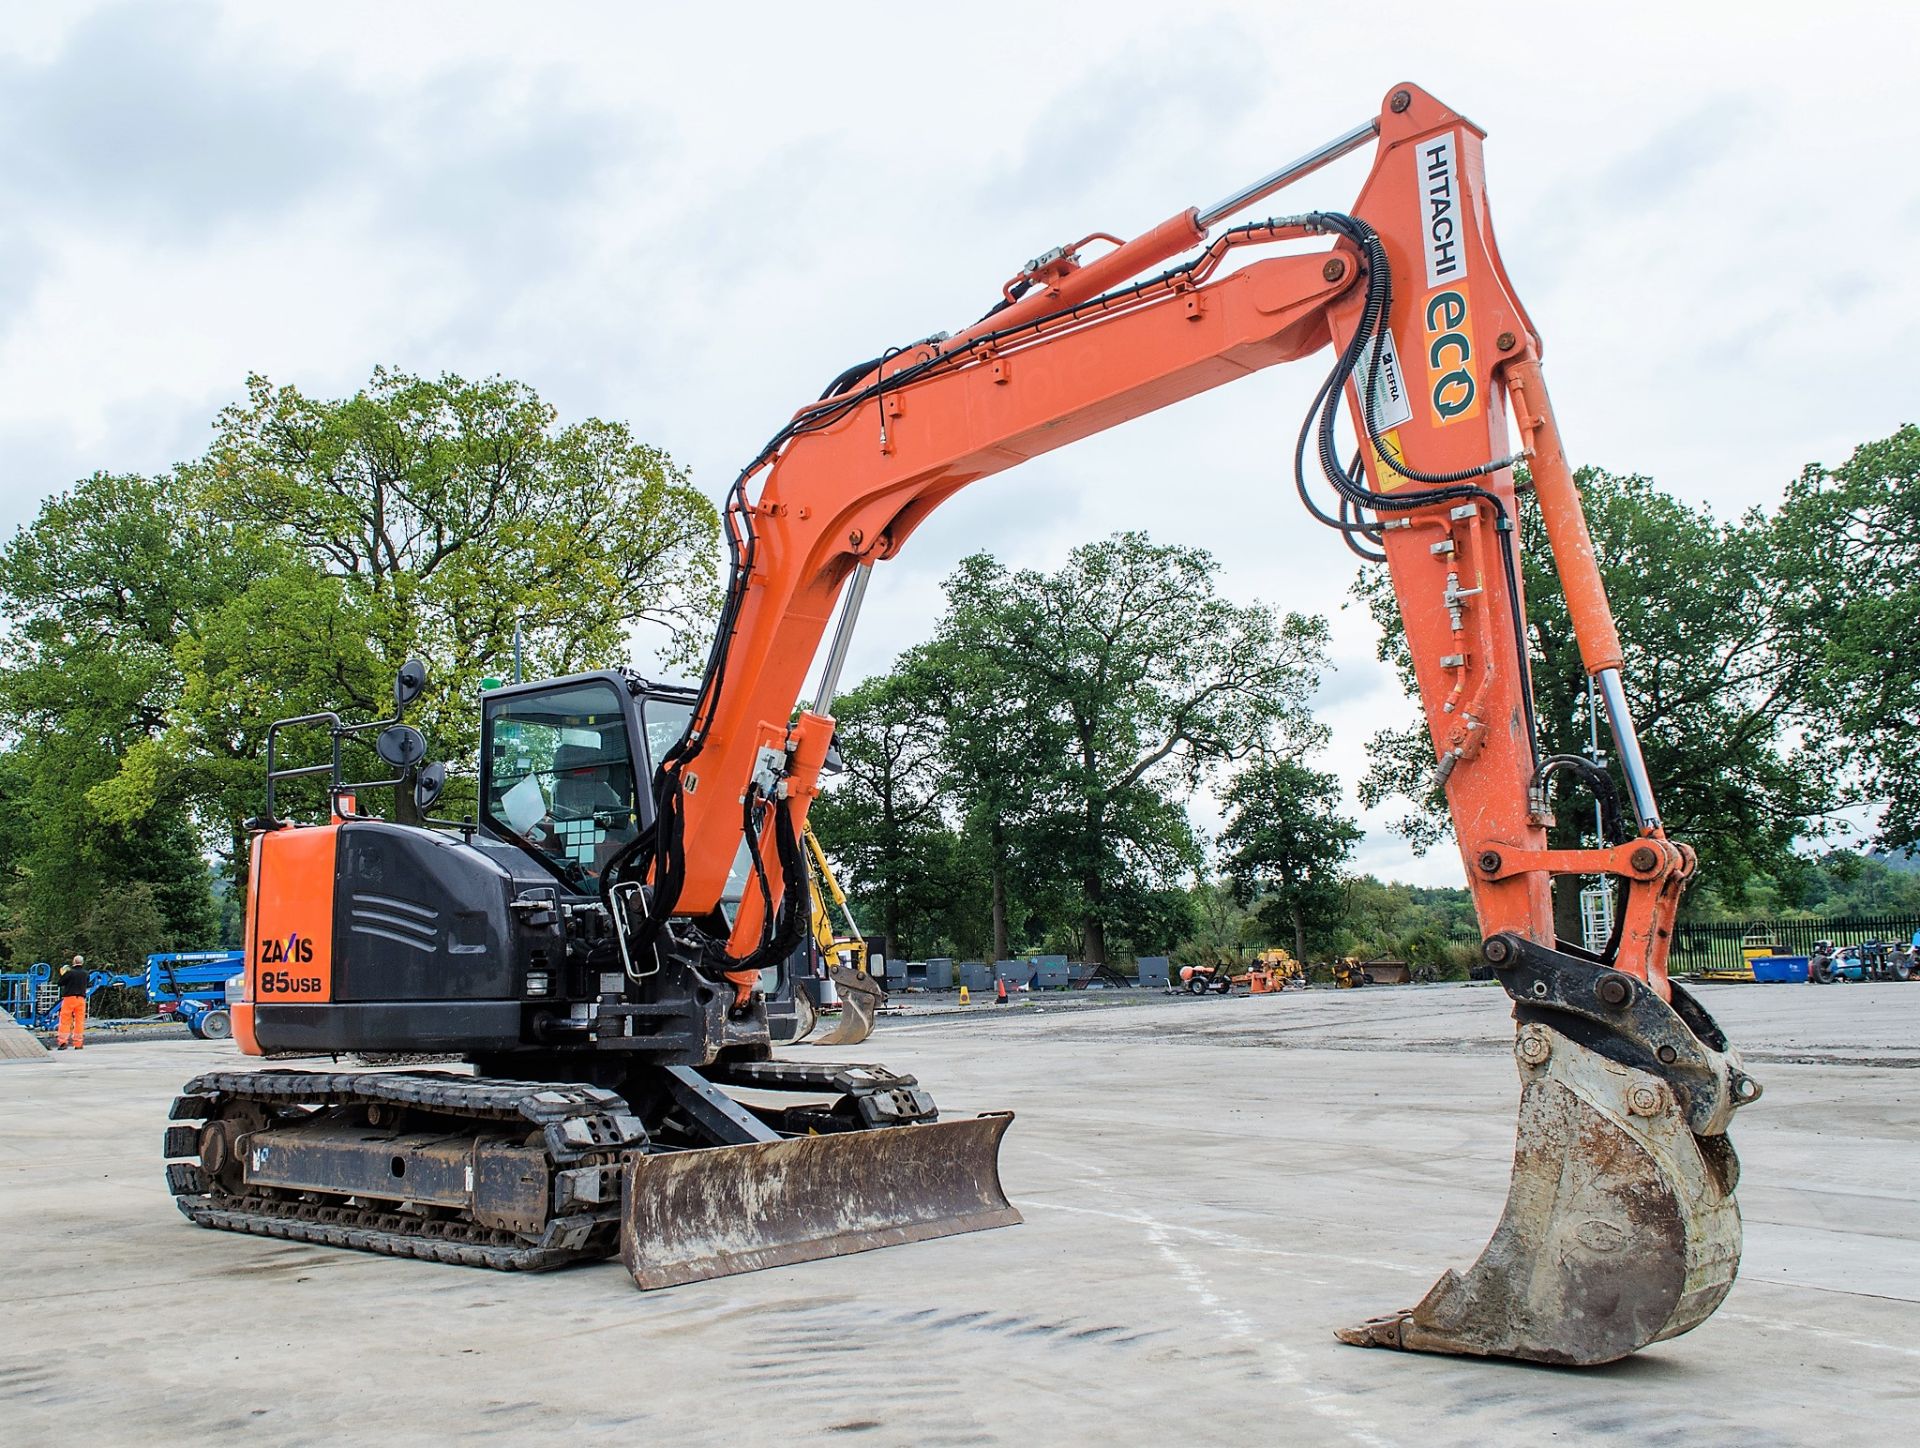 Hitachi Zaxis 85 USB-5 reduced tail swing 8.5 tonne rubber padd tracked excavator - Image 2 of 31